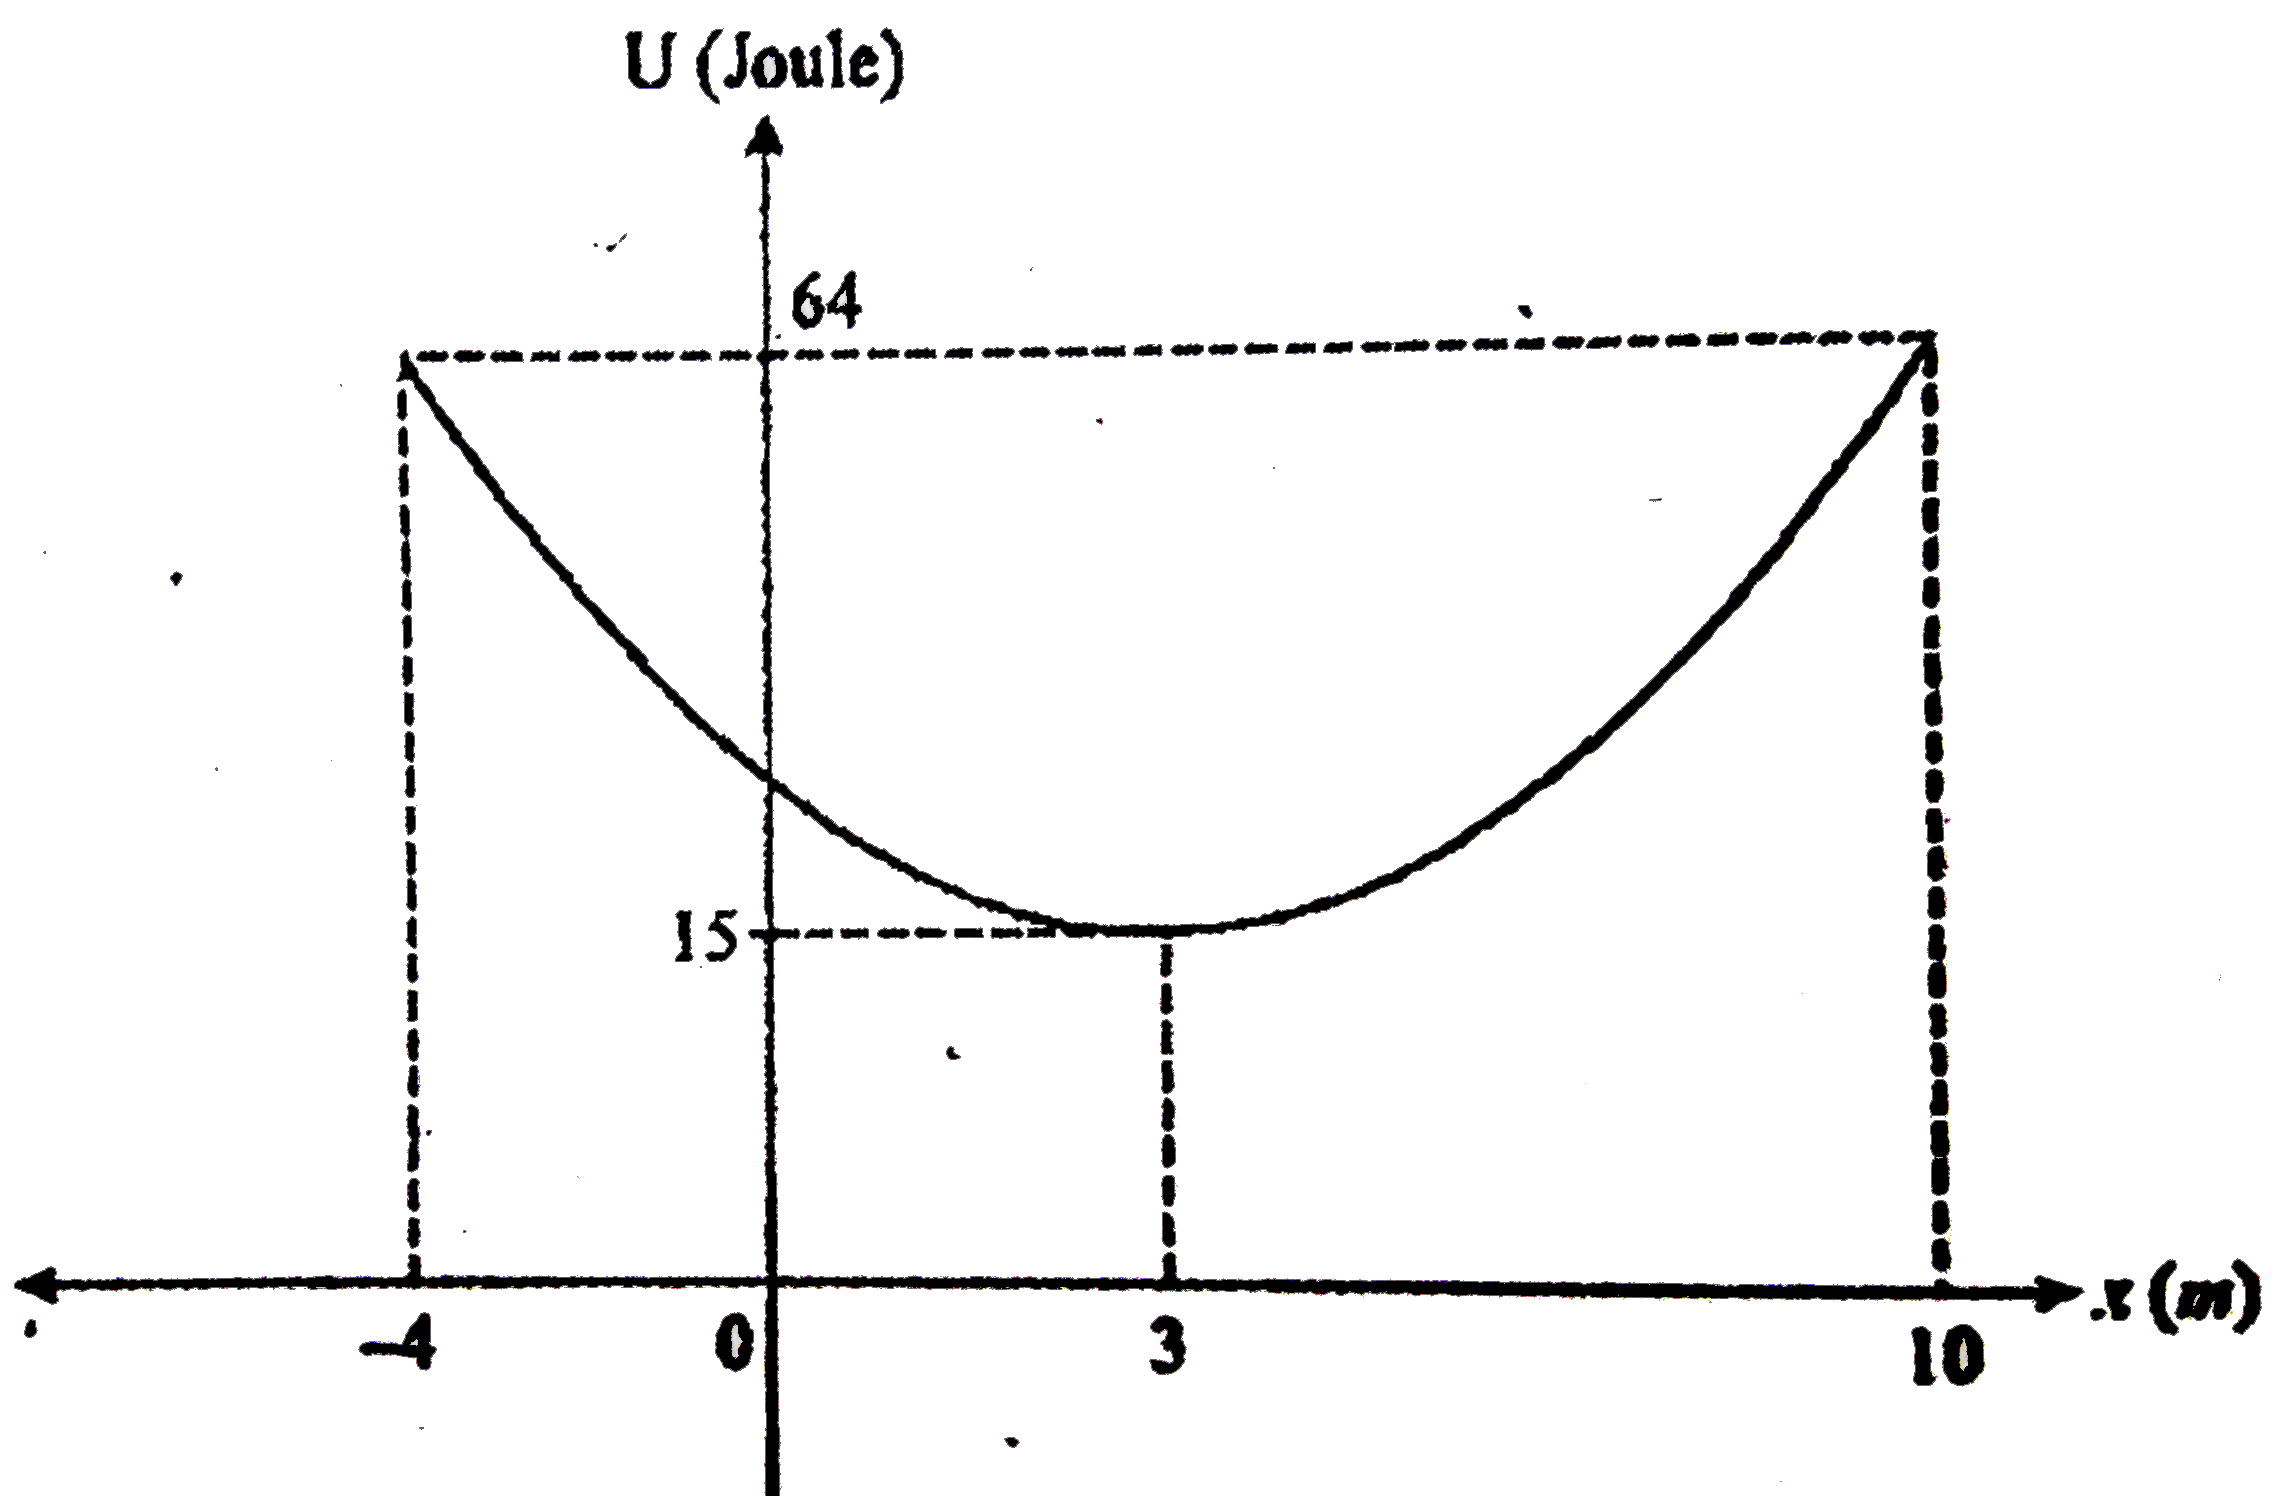 A single conservative force F(x) acts on a particle that moves along the x - axis. The graph of the potential energy with x is given. At x=5m, the particle has a kinetic energy of 50 J and its potential energy is related to position 'x' as U=15+(x-3)^(2) Joule where x is in meter. Then: